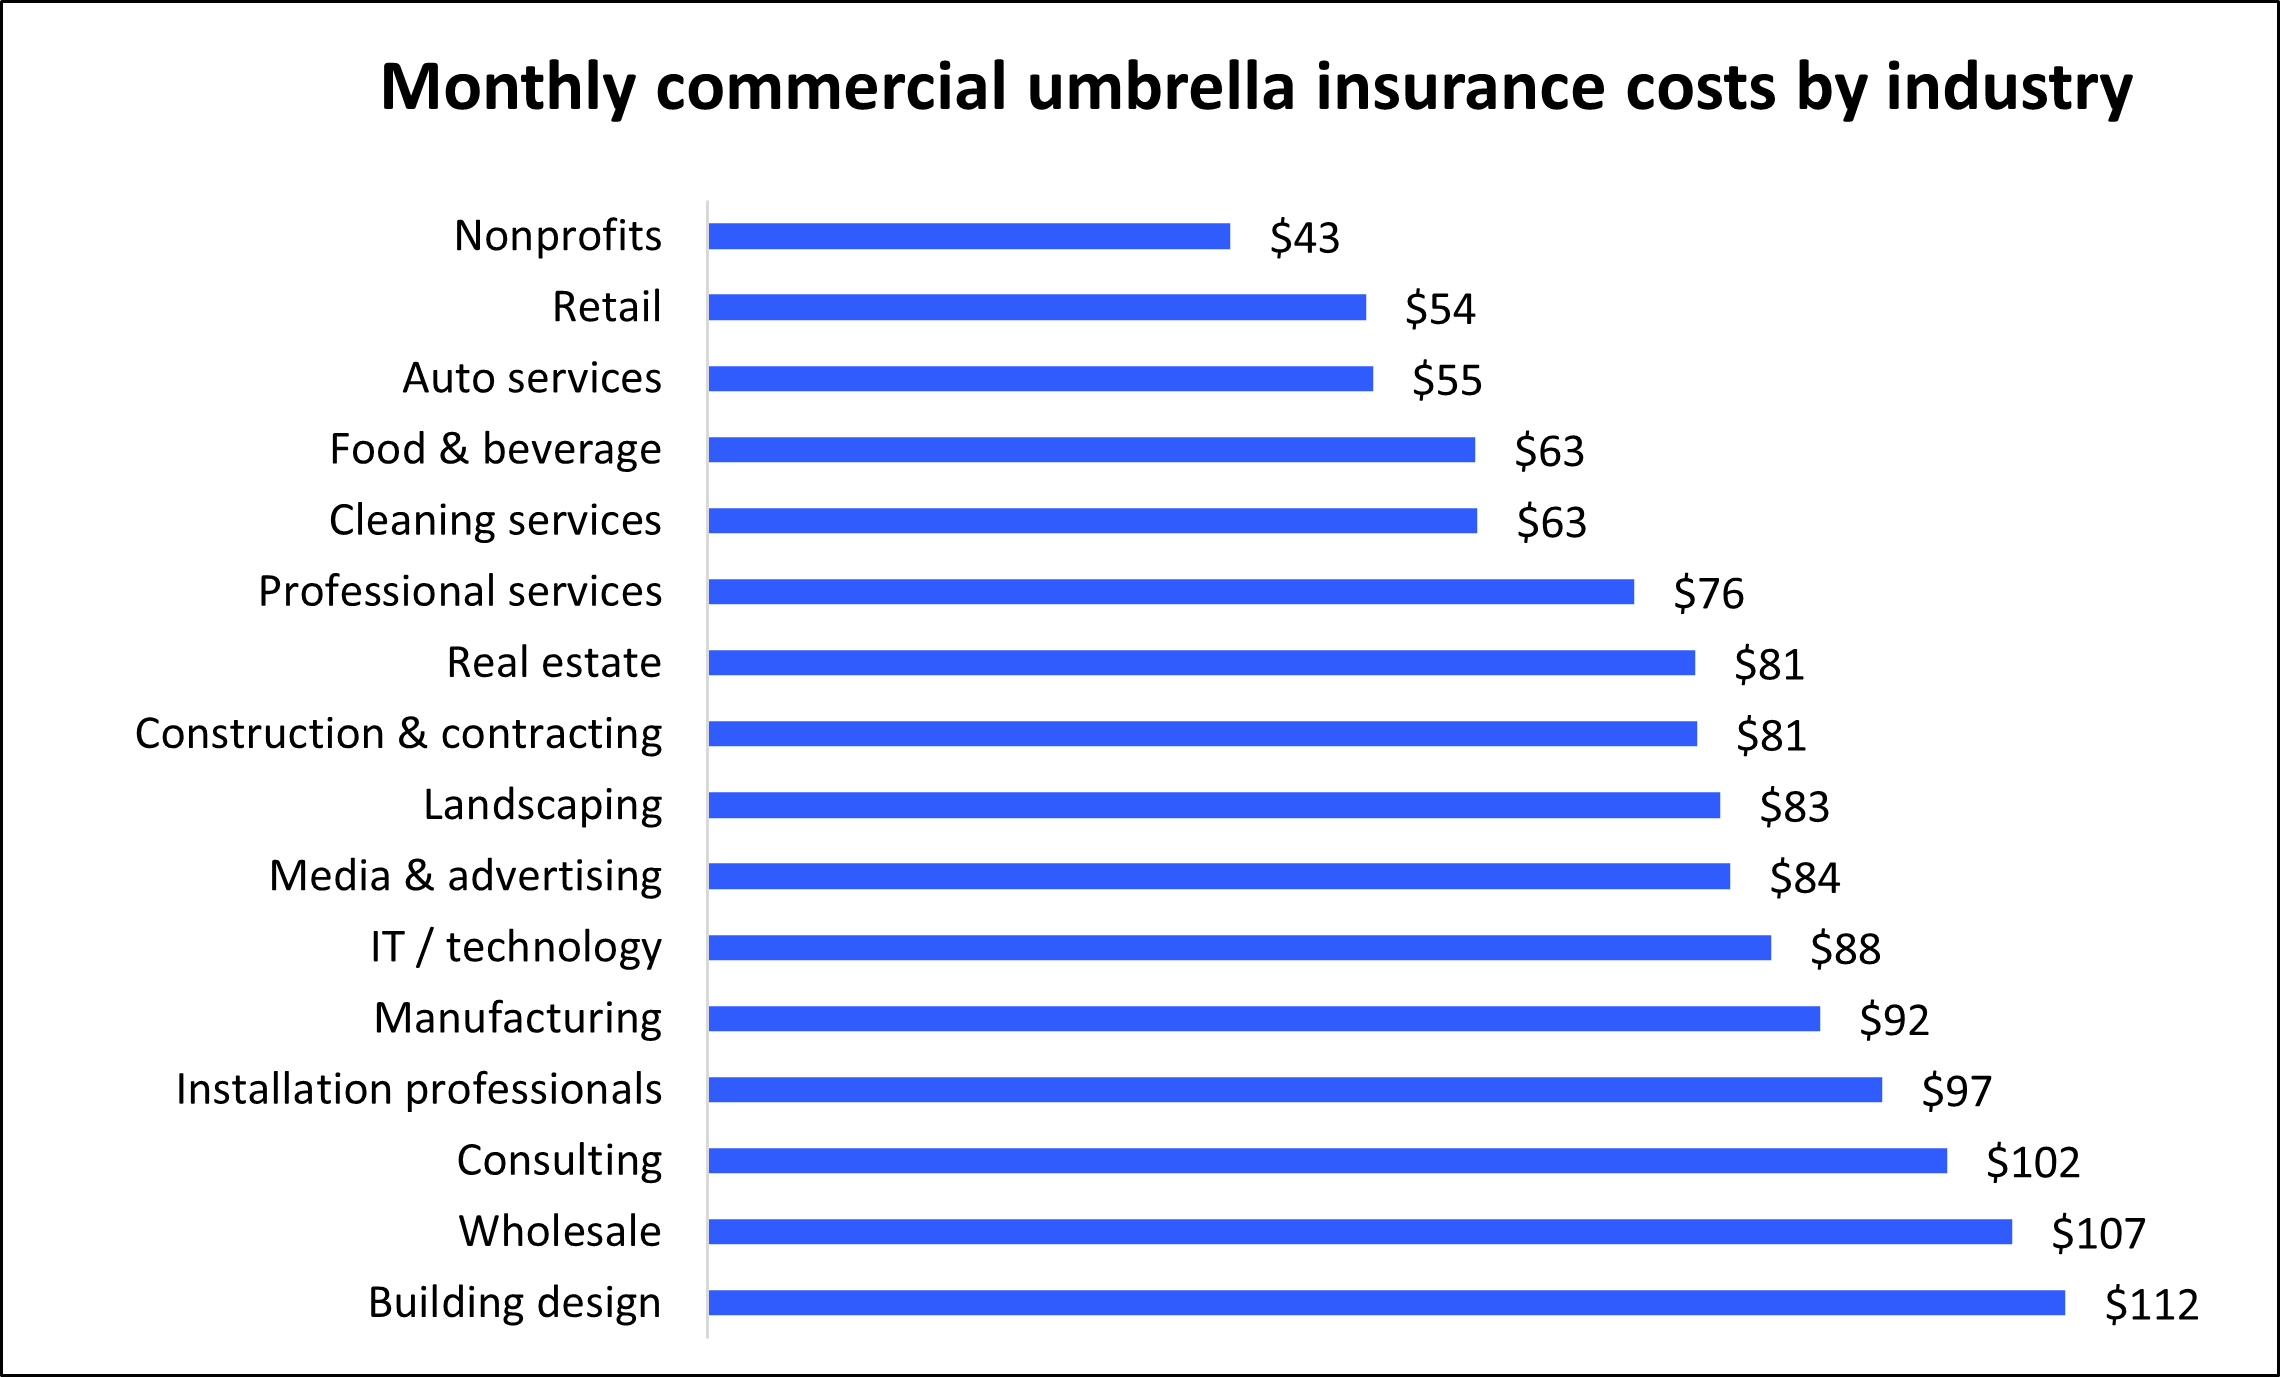 Monthly commercial umbrella insurance costs for Insureon customers by industry.